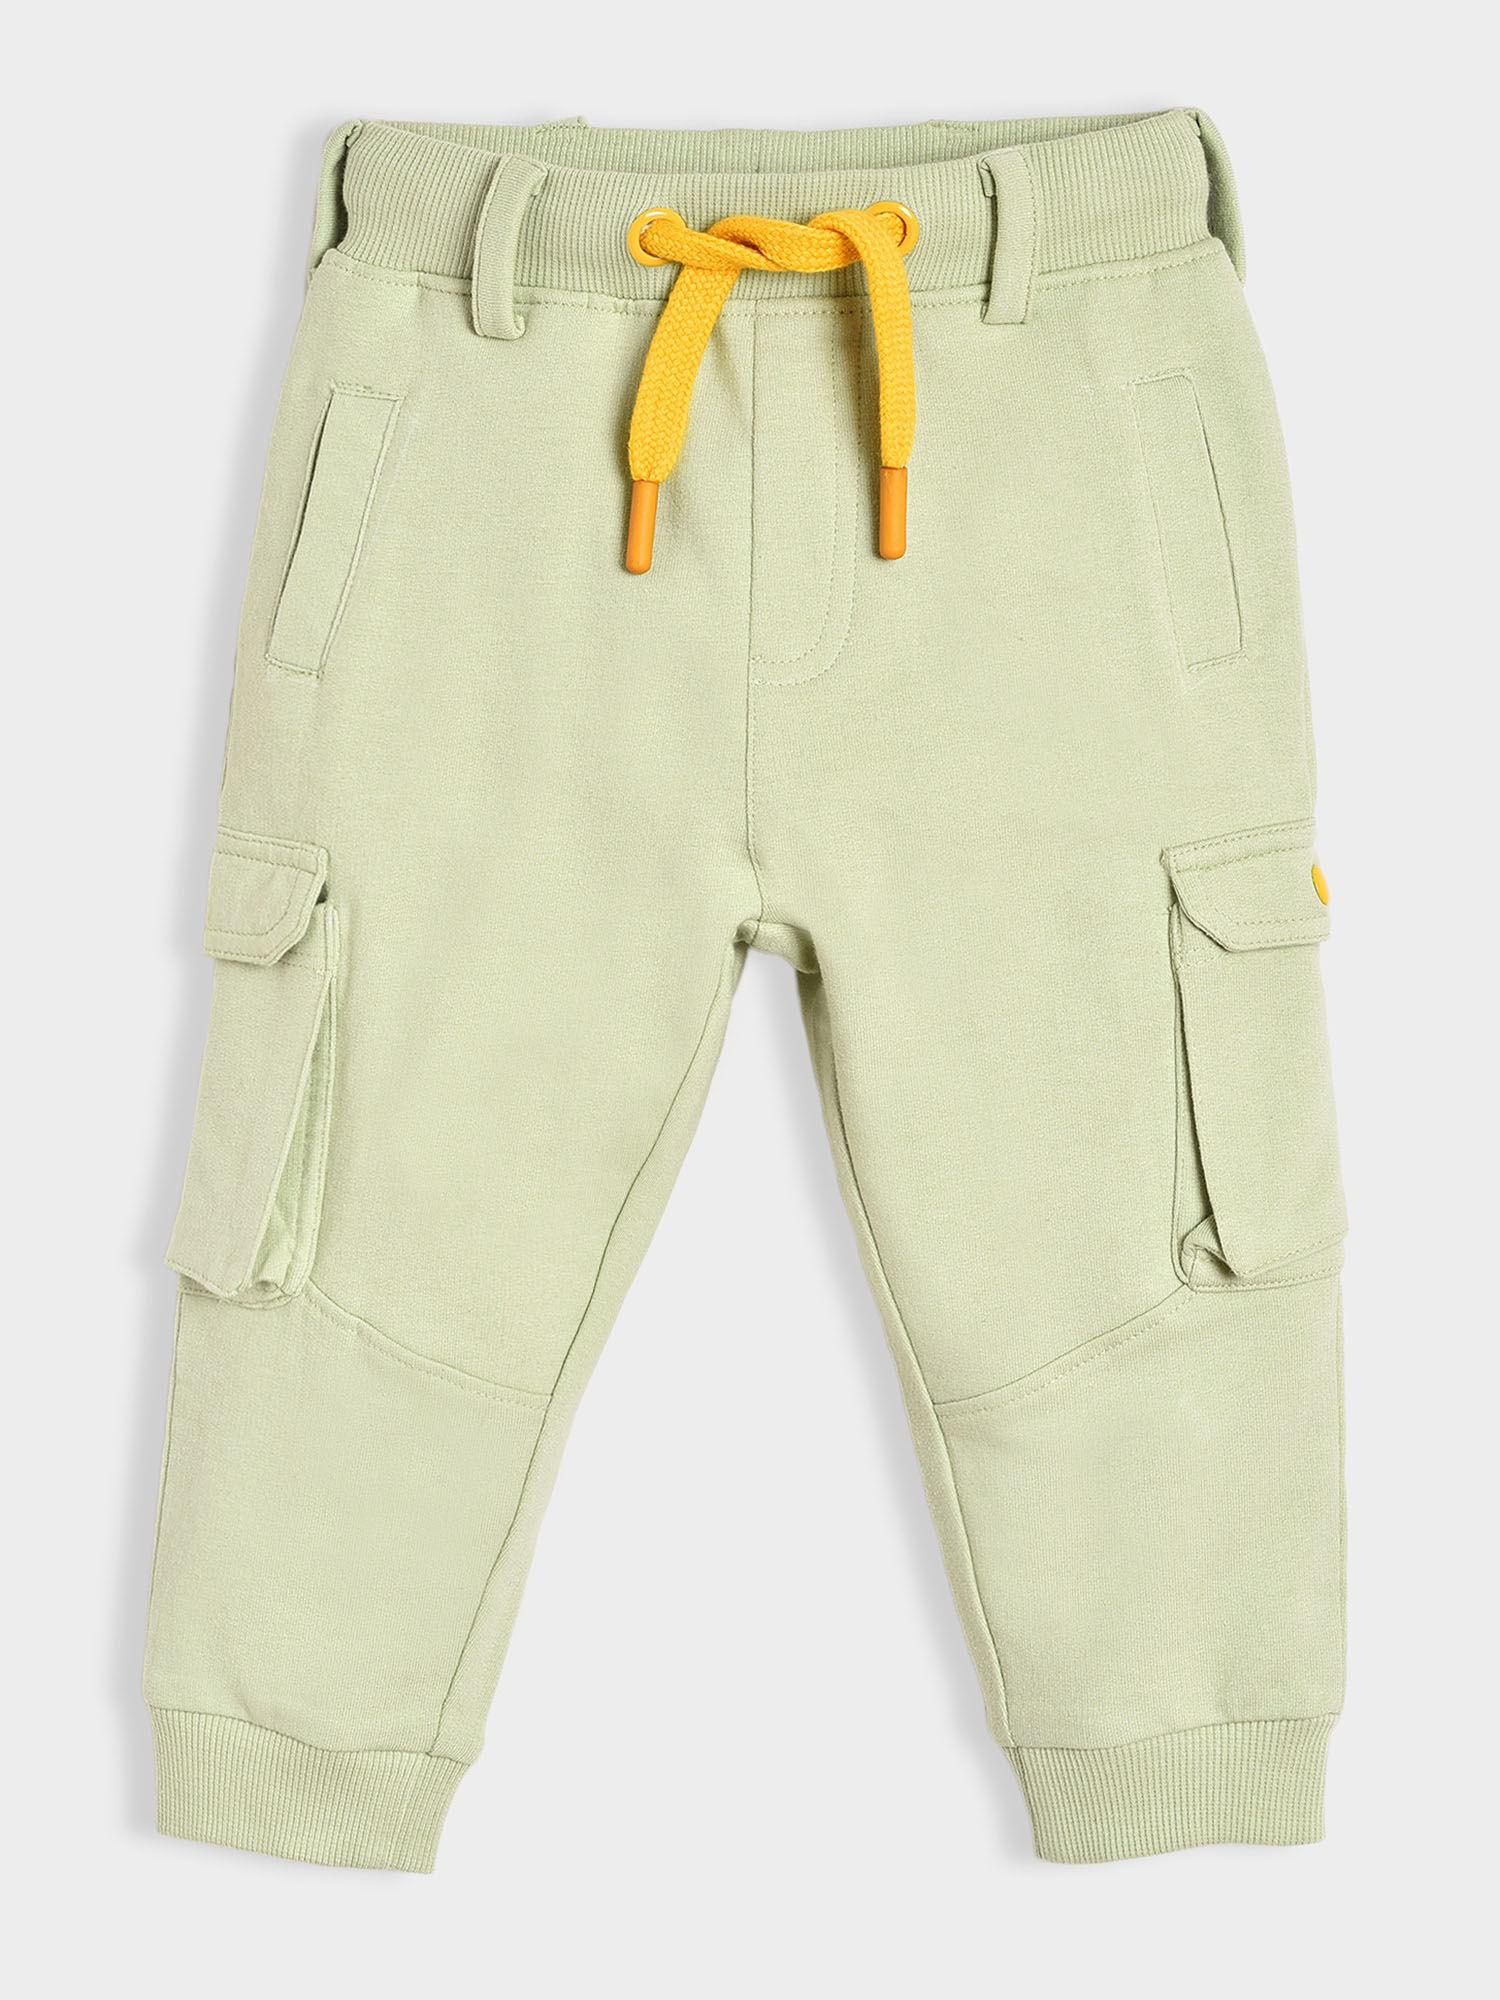 solid cotton green joggers pants for kids